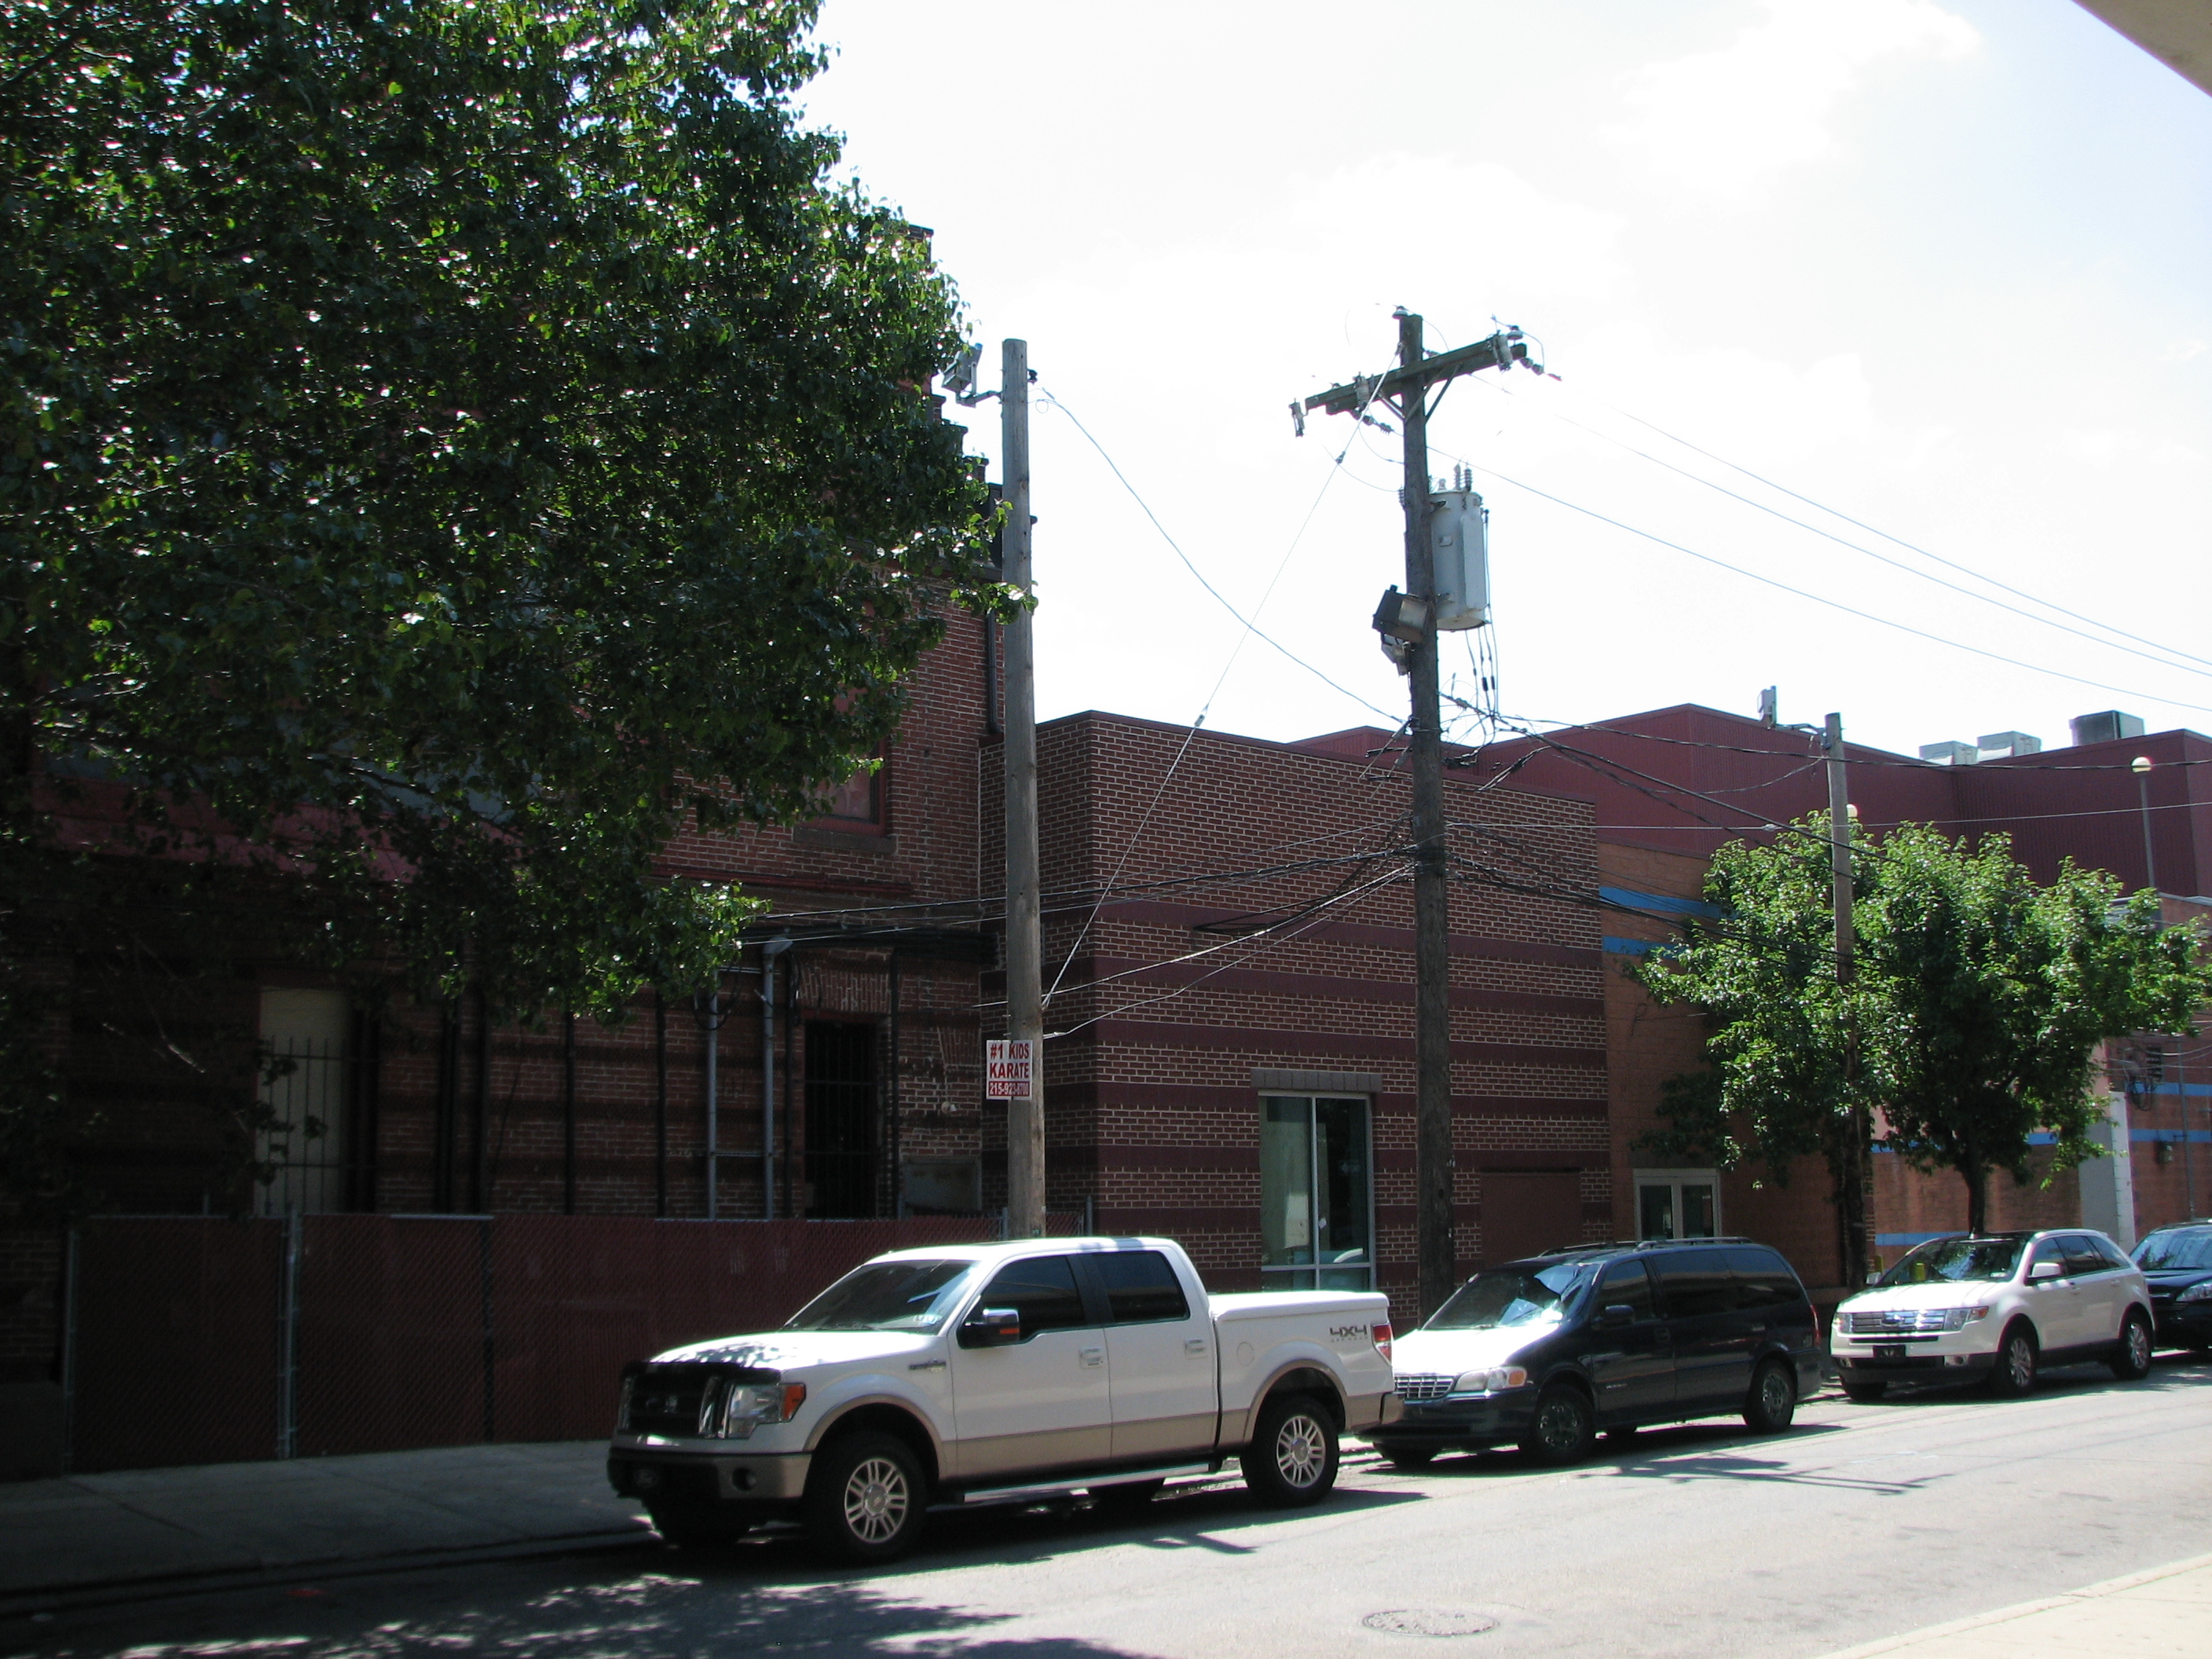 Preservationists hope the demo permits are intended for a modern addition to the rear of the building on Water Street.